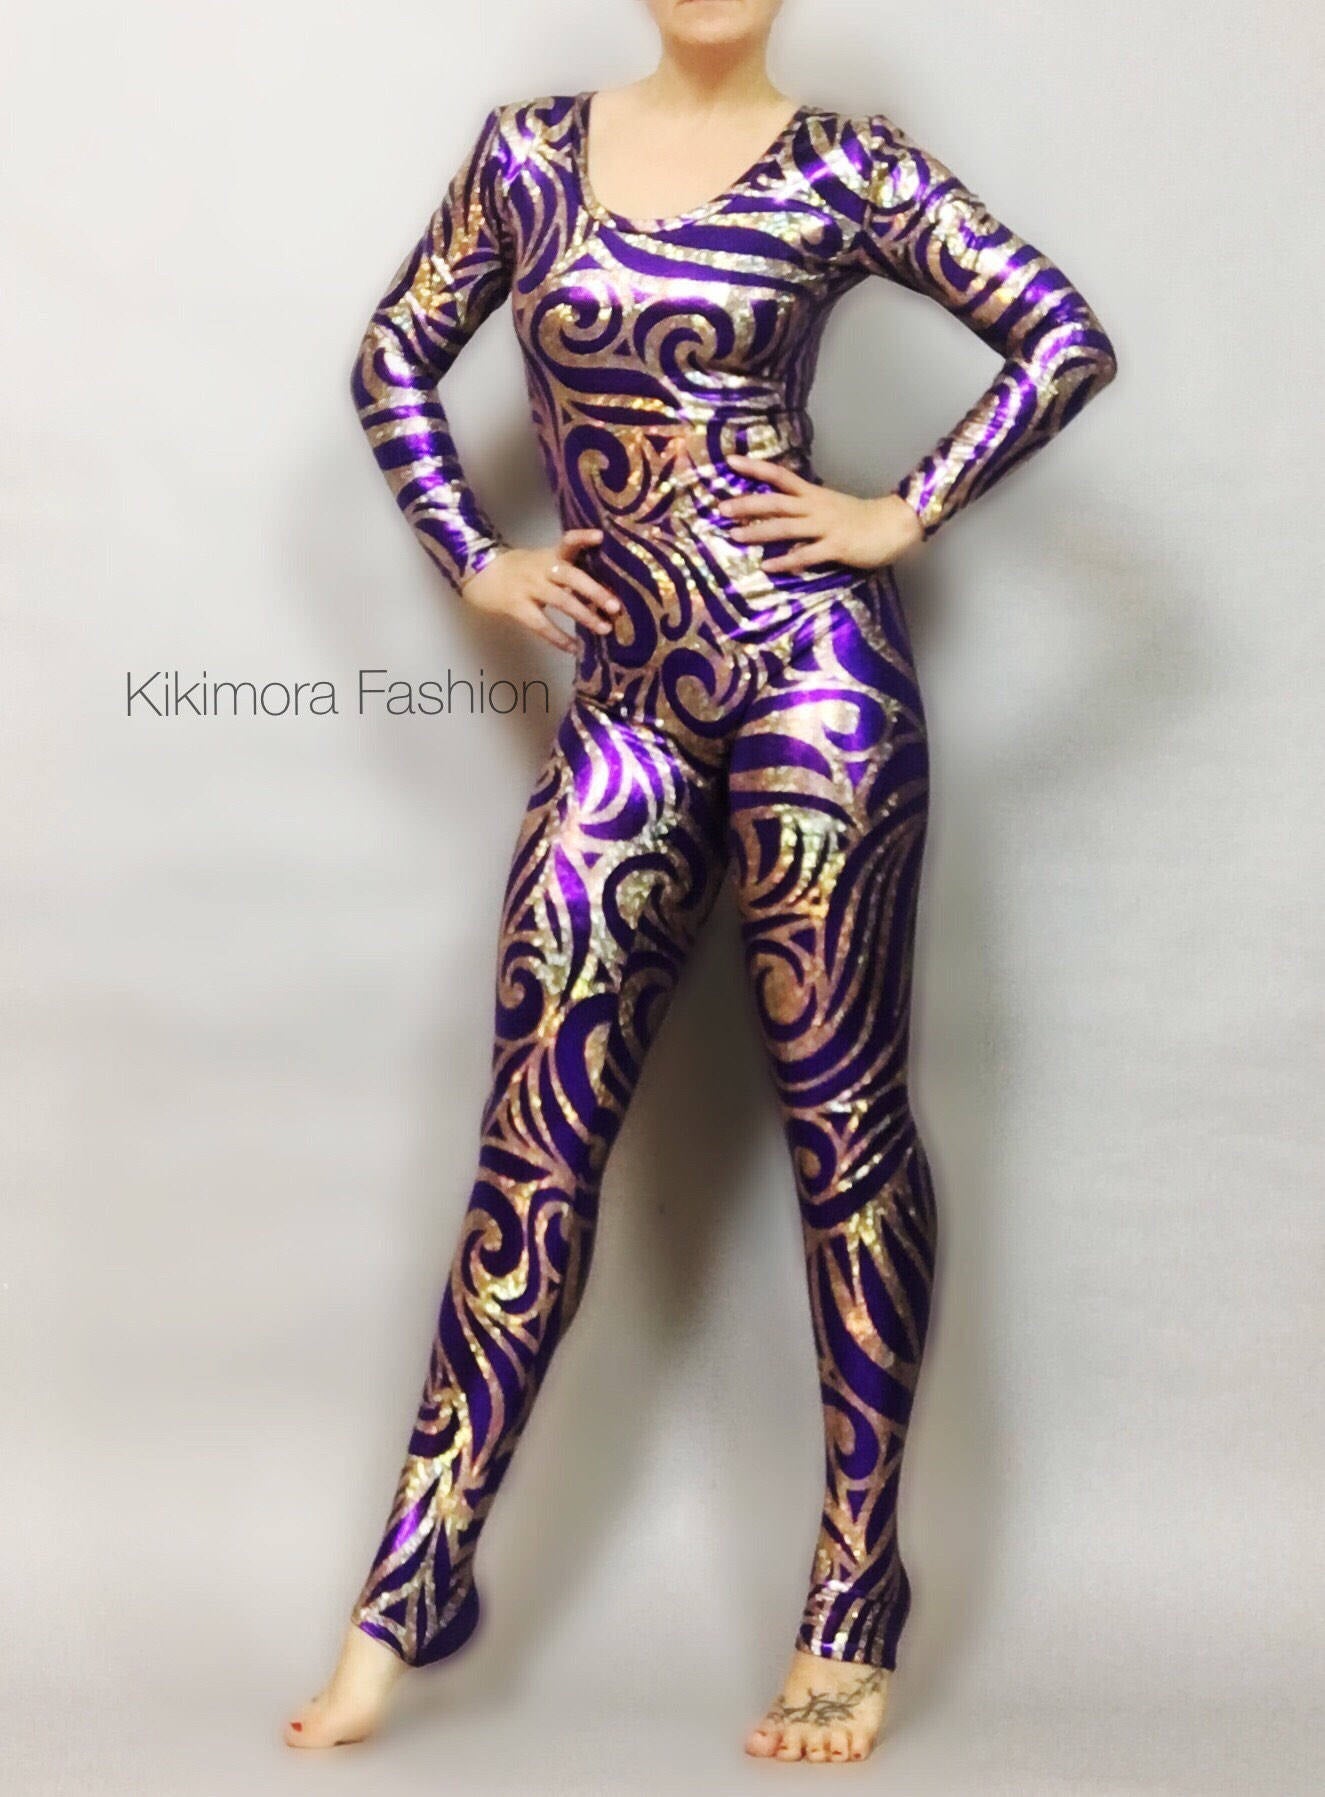 Shiny Spandex Catsuit, Gymnastic Leotard, Beautiful Frozen Snowflake Jumper Cosplay for Circus Themed Party, Made in USA